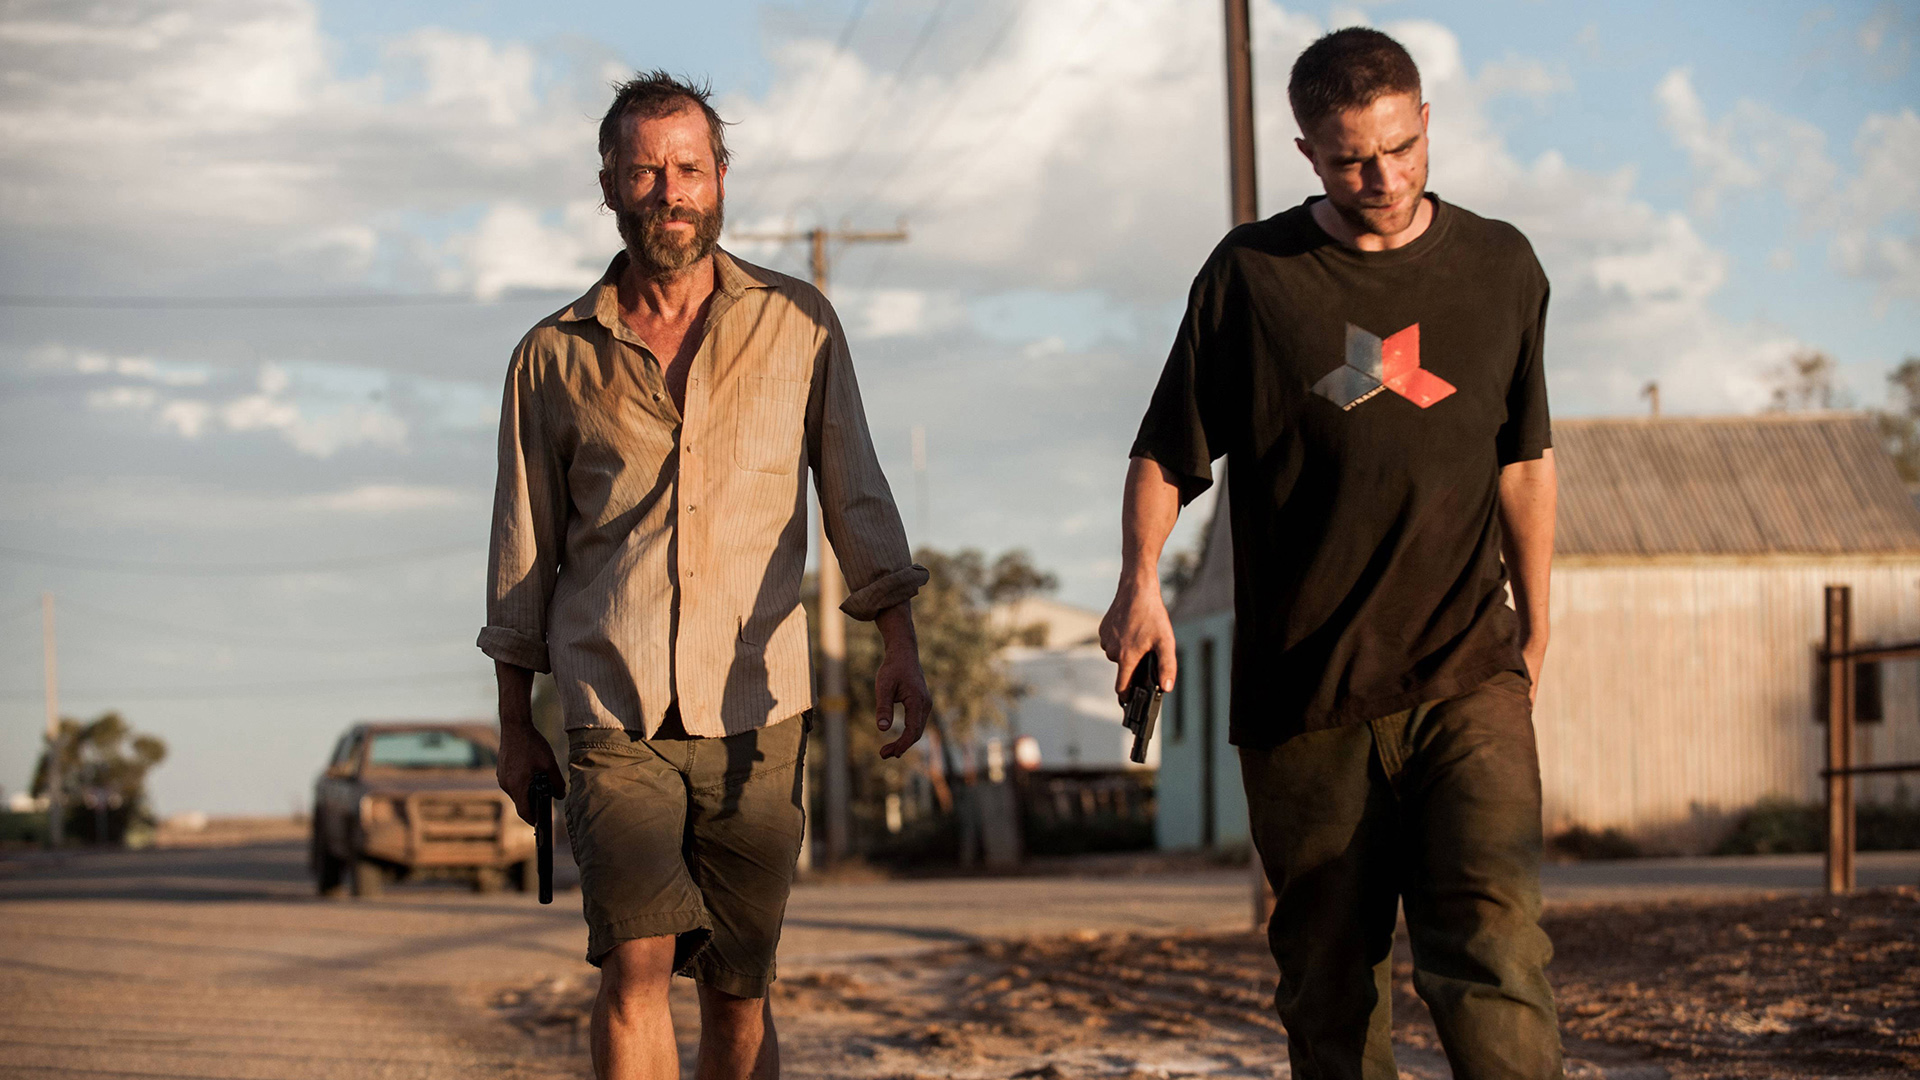 Movie The Rover (2014) HD Wallpaper | Background Image